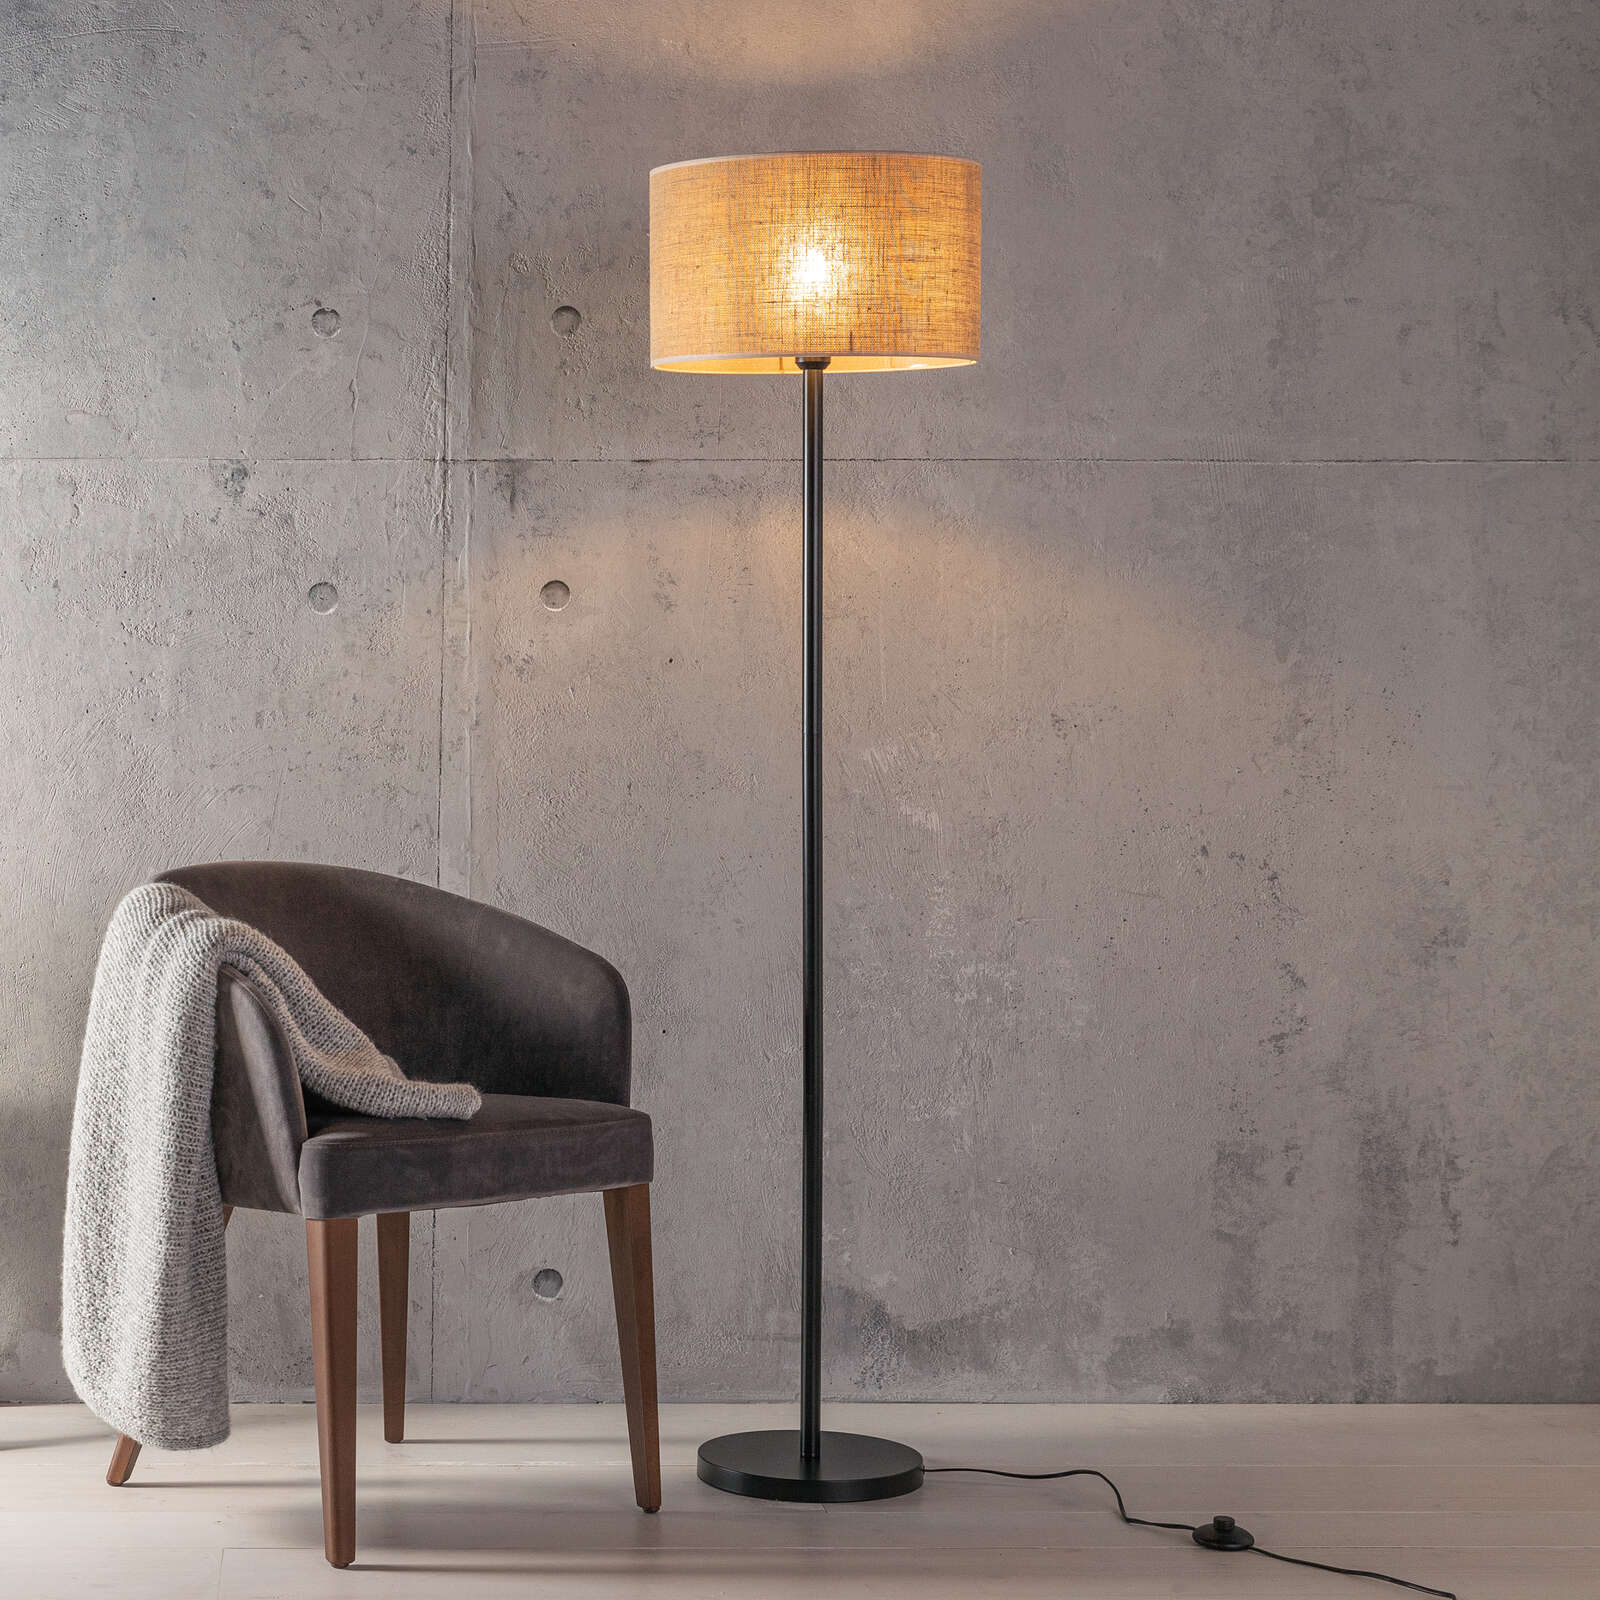             Floor lamp made of textile - Alicia 4 - Brown
        